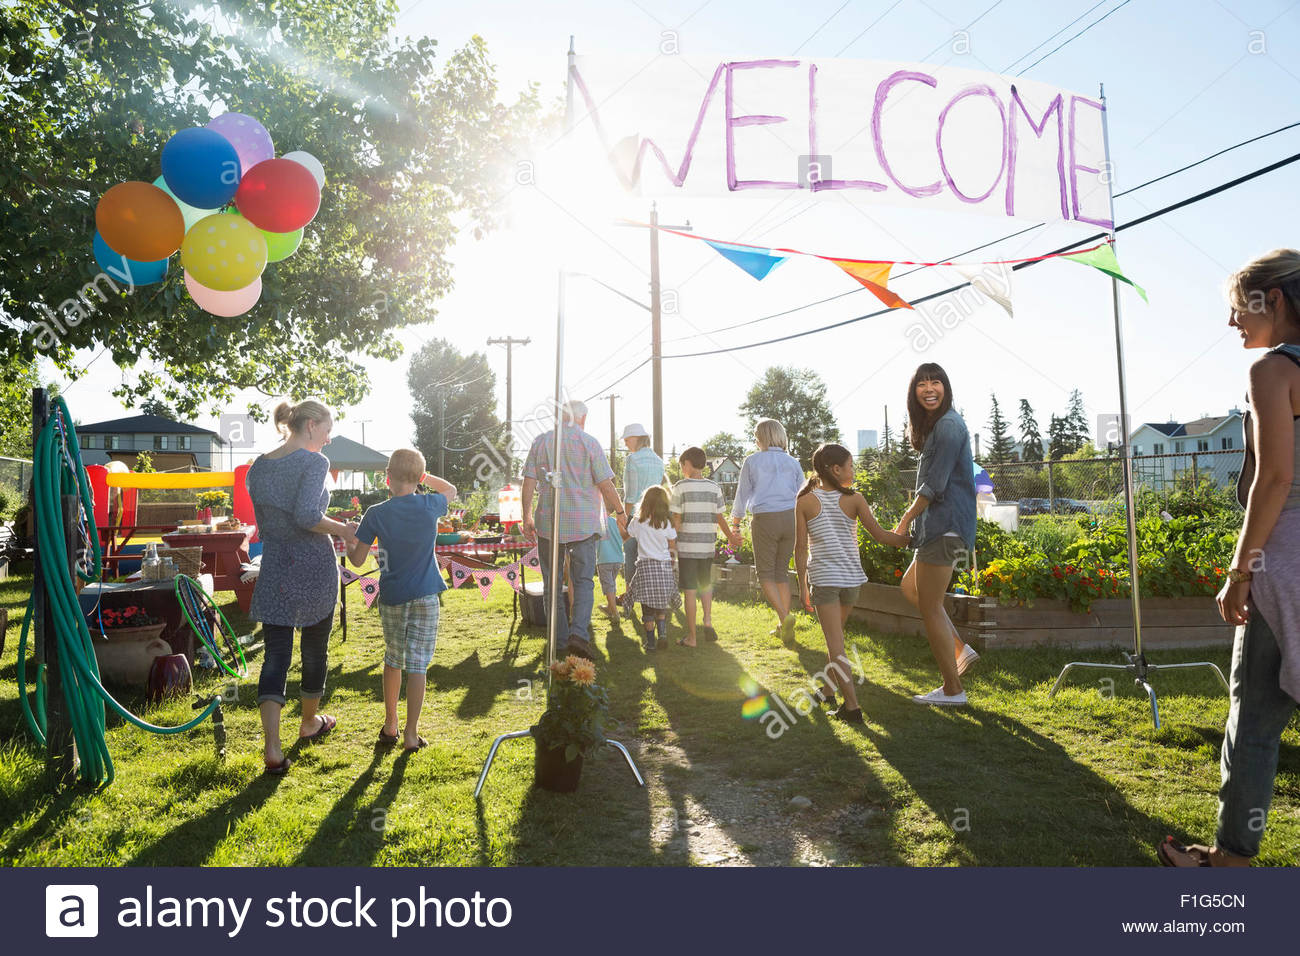 Neighbors entering under Welcome sign party in park Stock Photo